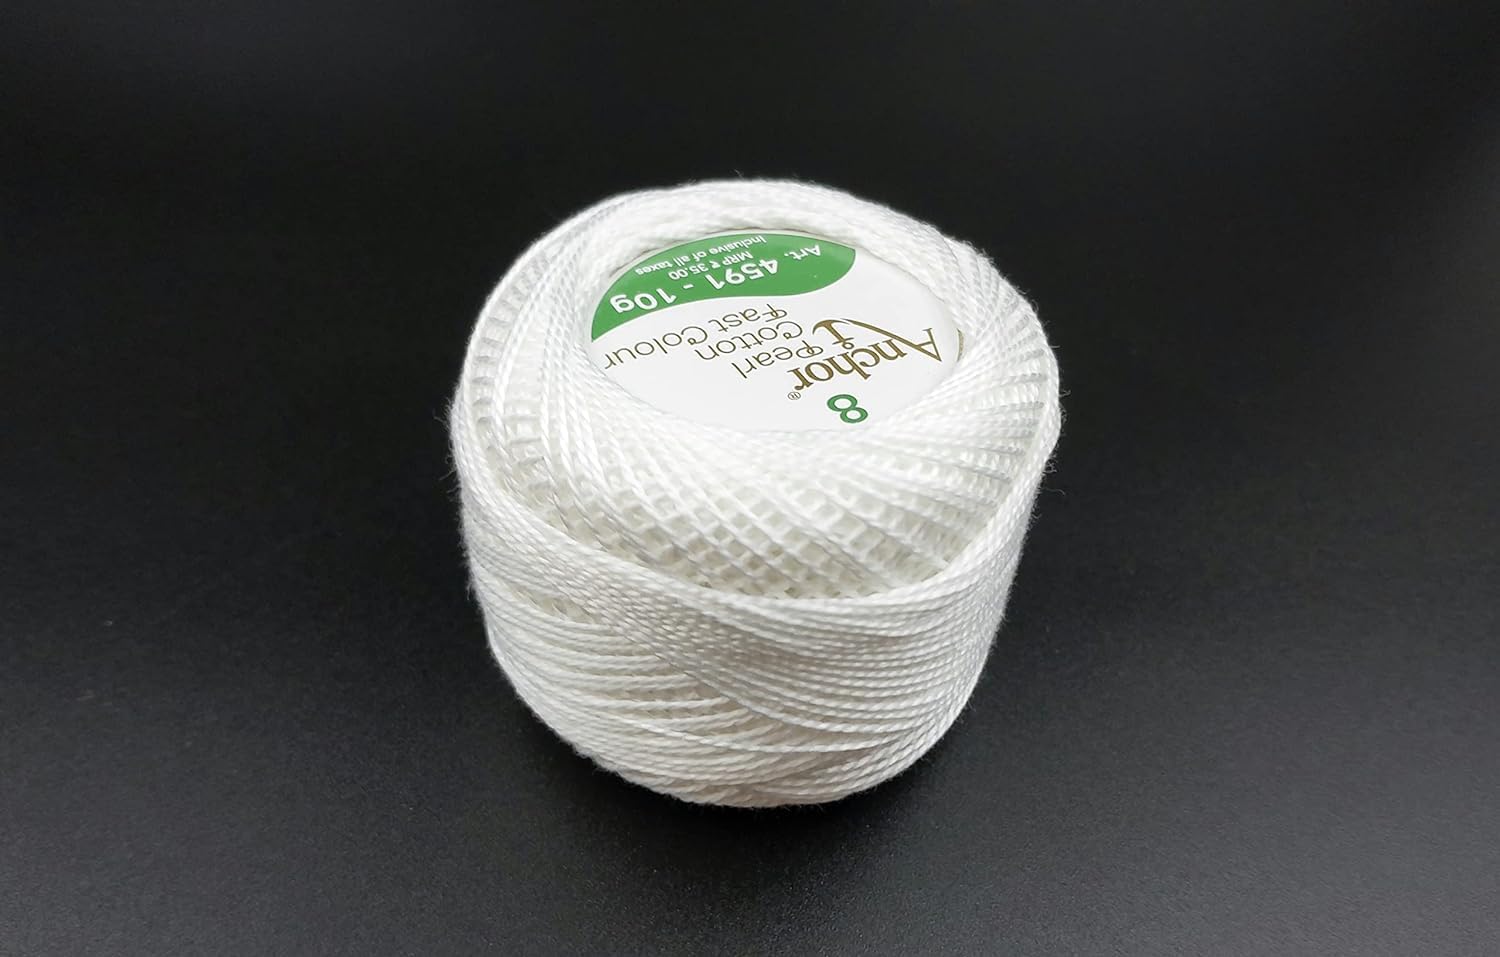 20 Pieces (10 Grams / 85 Meters Each) Crochet Cotton Pearl Threads Crochet Cotton Crochet Thread in Assorted Color for Projects, Blankets, Glove and Applique